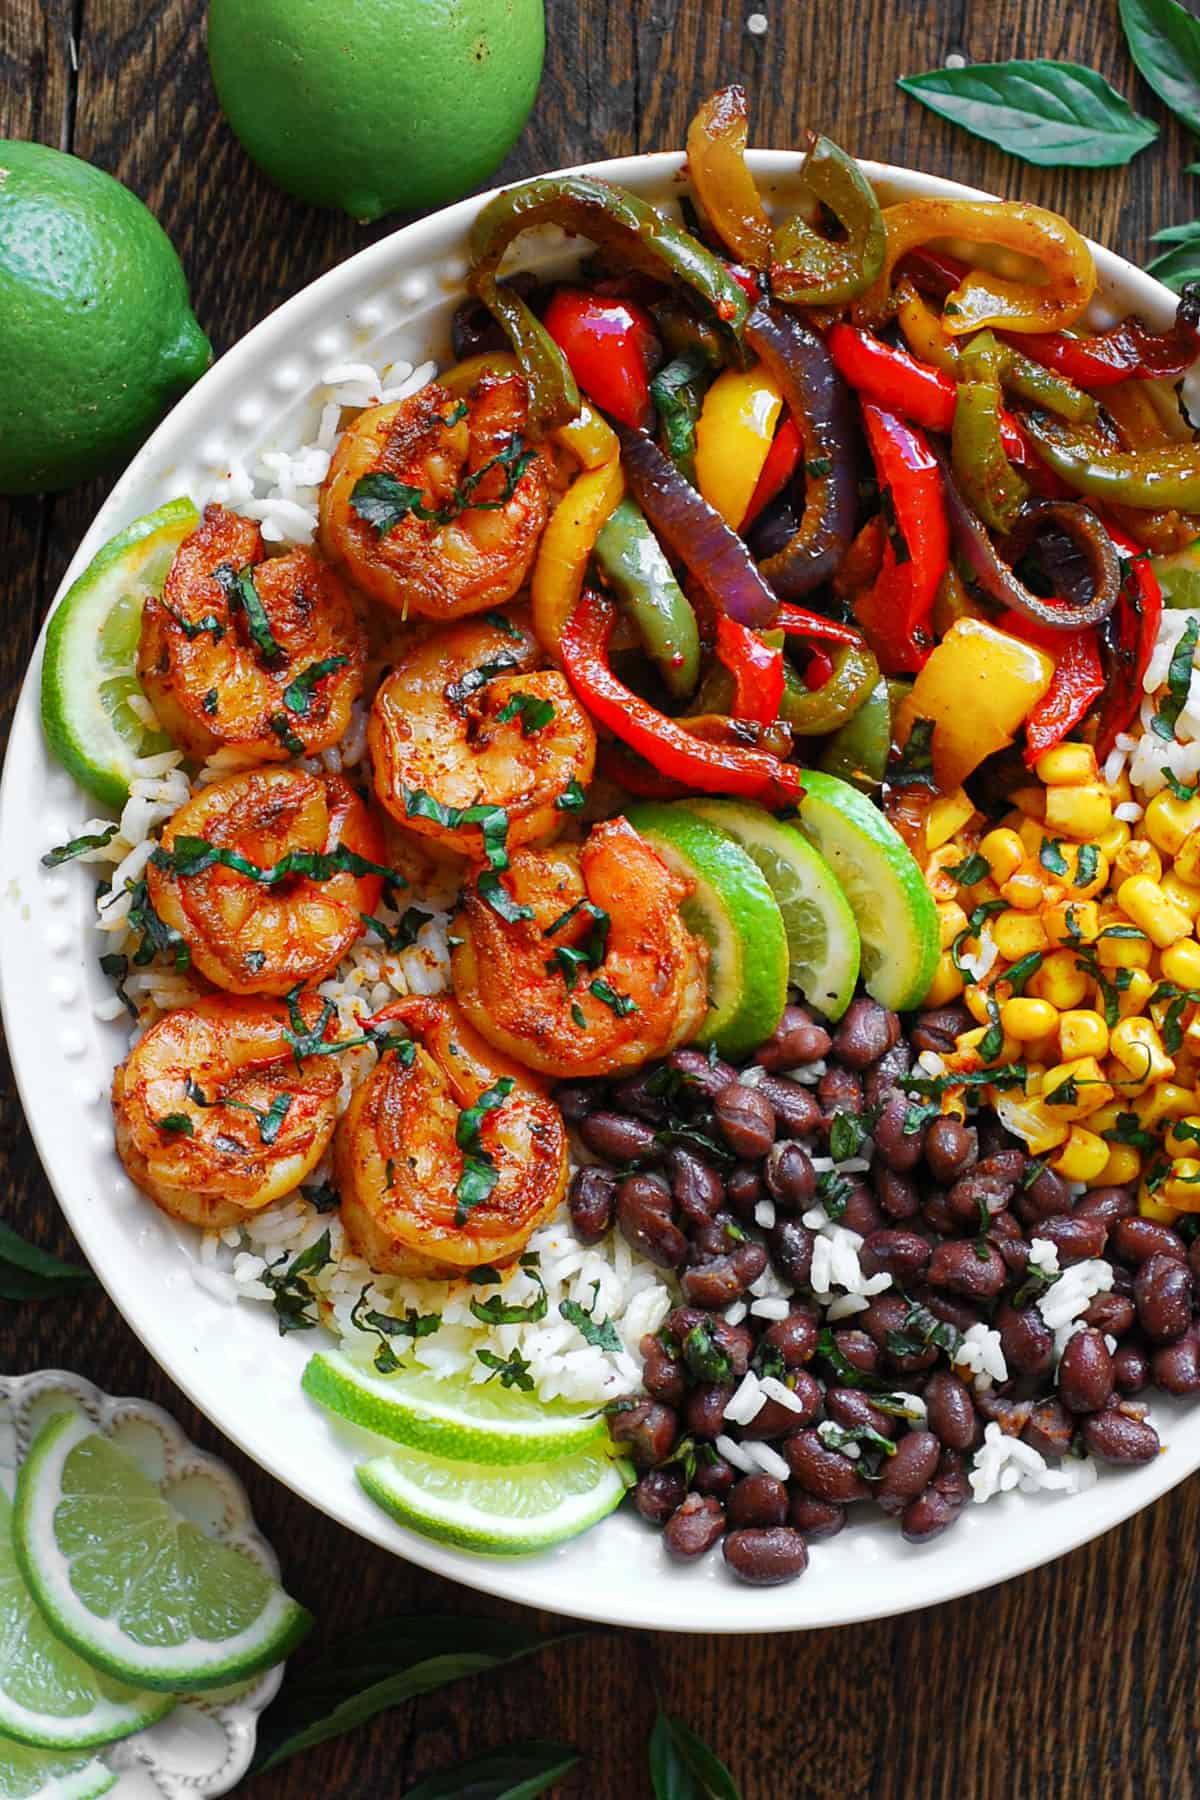 Shrimp Fajita bowl with bell peppers, red onions, black beans, corn, rice, and lime slices.